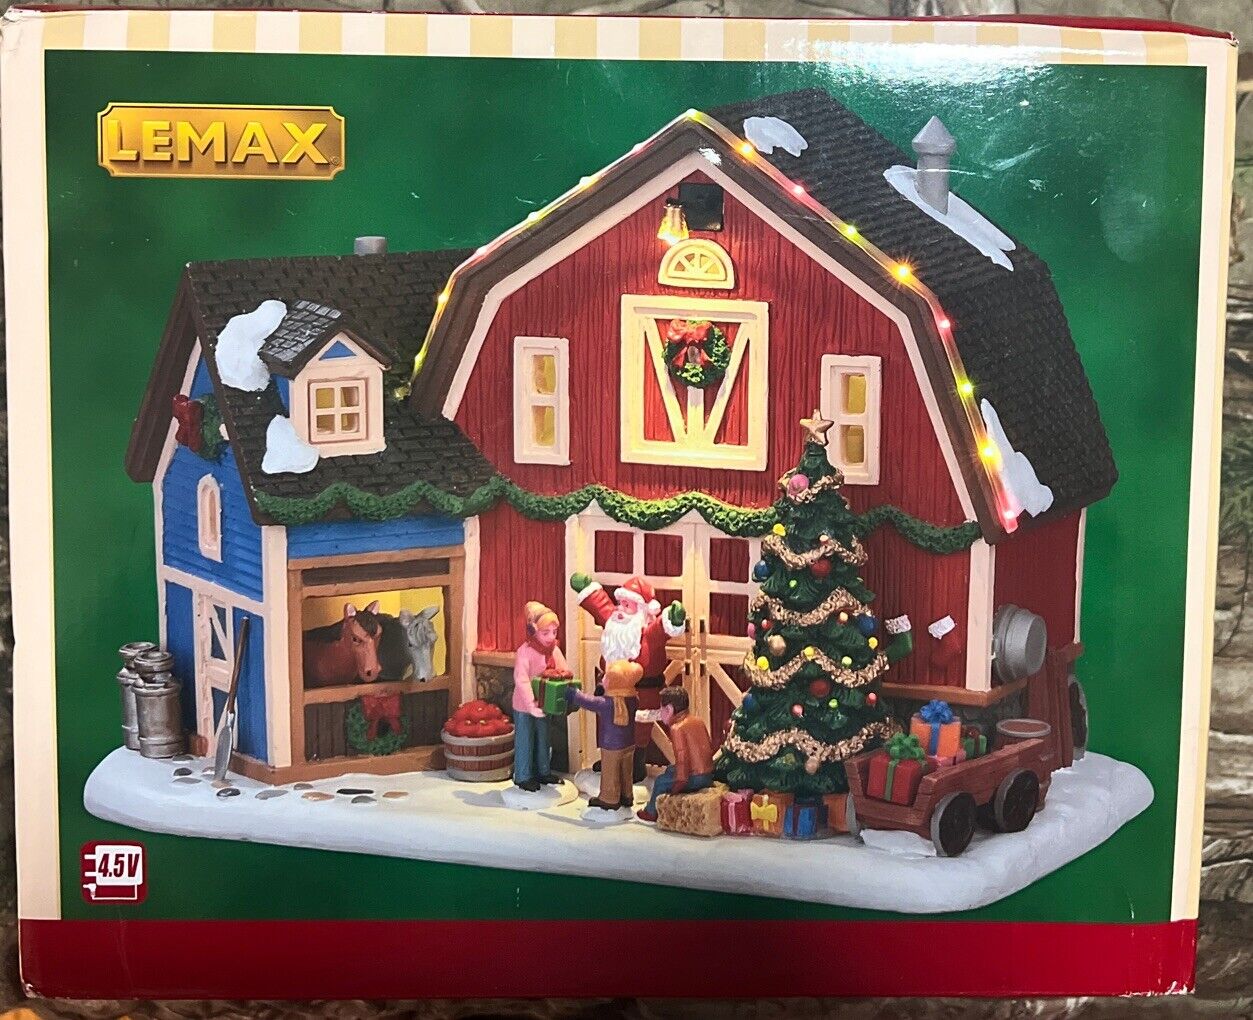 2017 LEMAX LIGHTED CHRISTMAS AT THE FARM BUILDING #75192  w/ Box - RARE